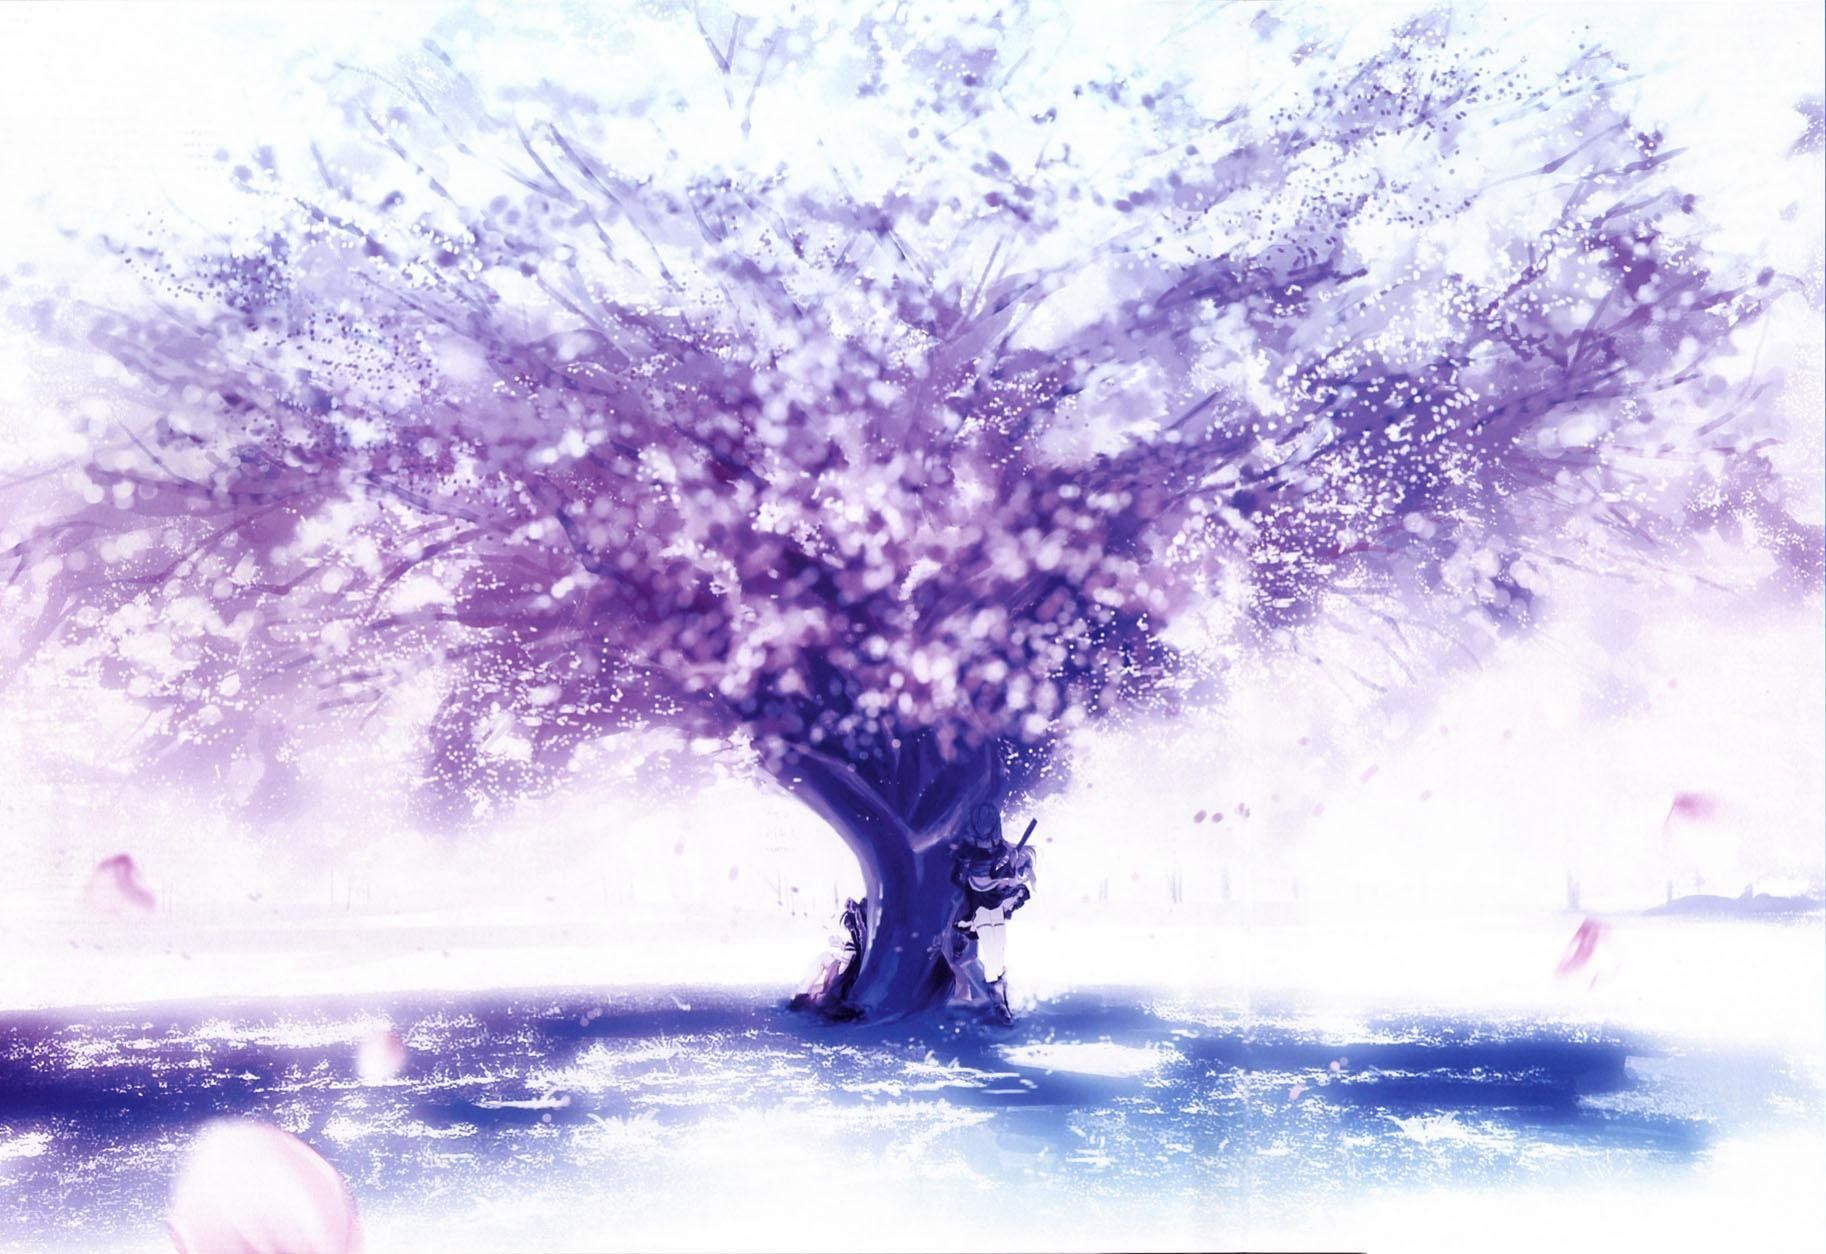 A tree with purple flowers in the background - Pisces